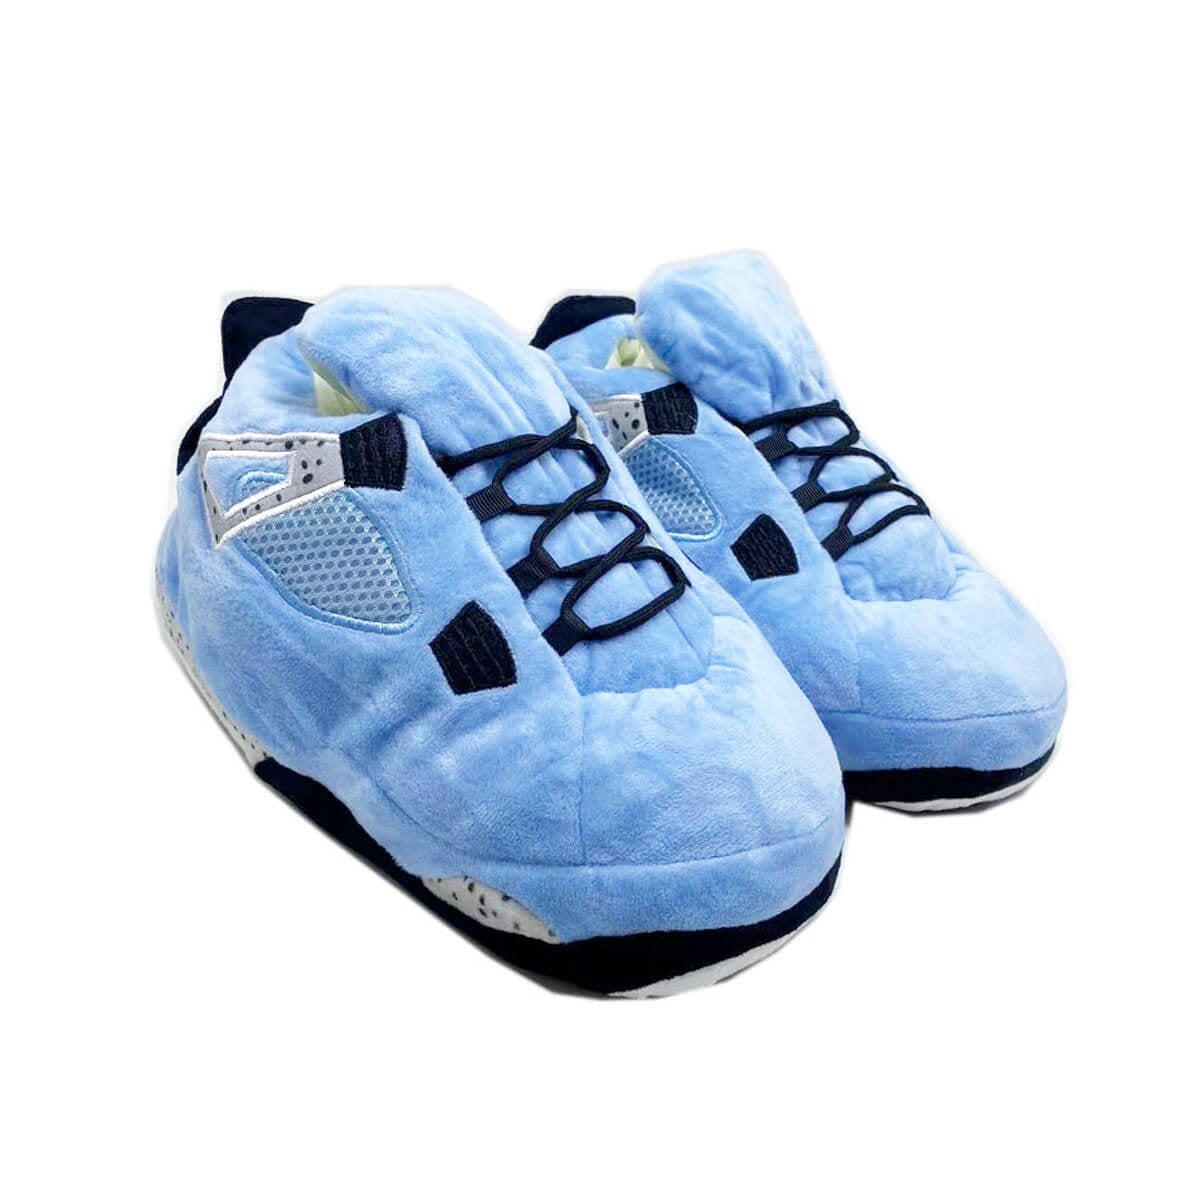 Sneaker Slippers - One Size Fits all Slippers - Plush House Shoes Unisex  Winter Fluffy Indoor Slides (BLACK) - Walmart.com